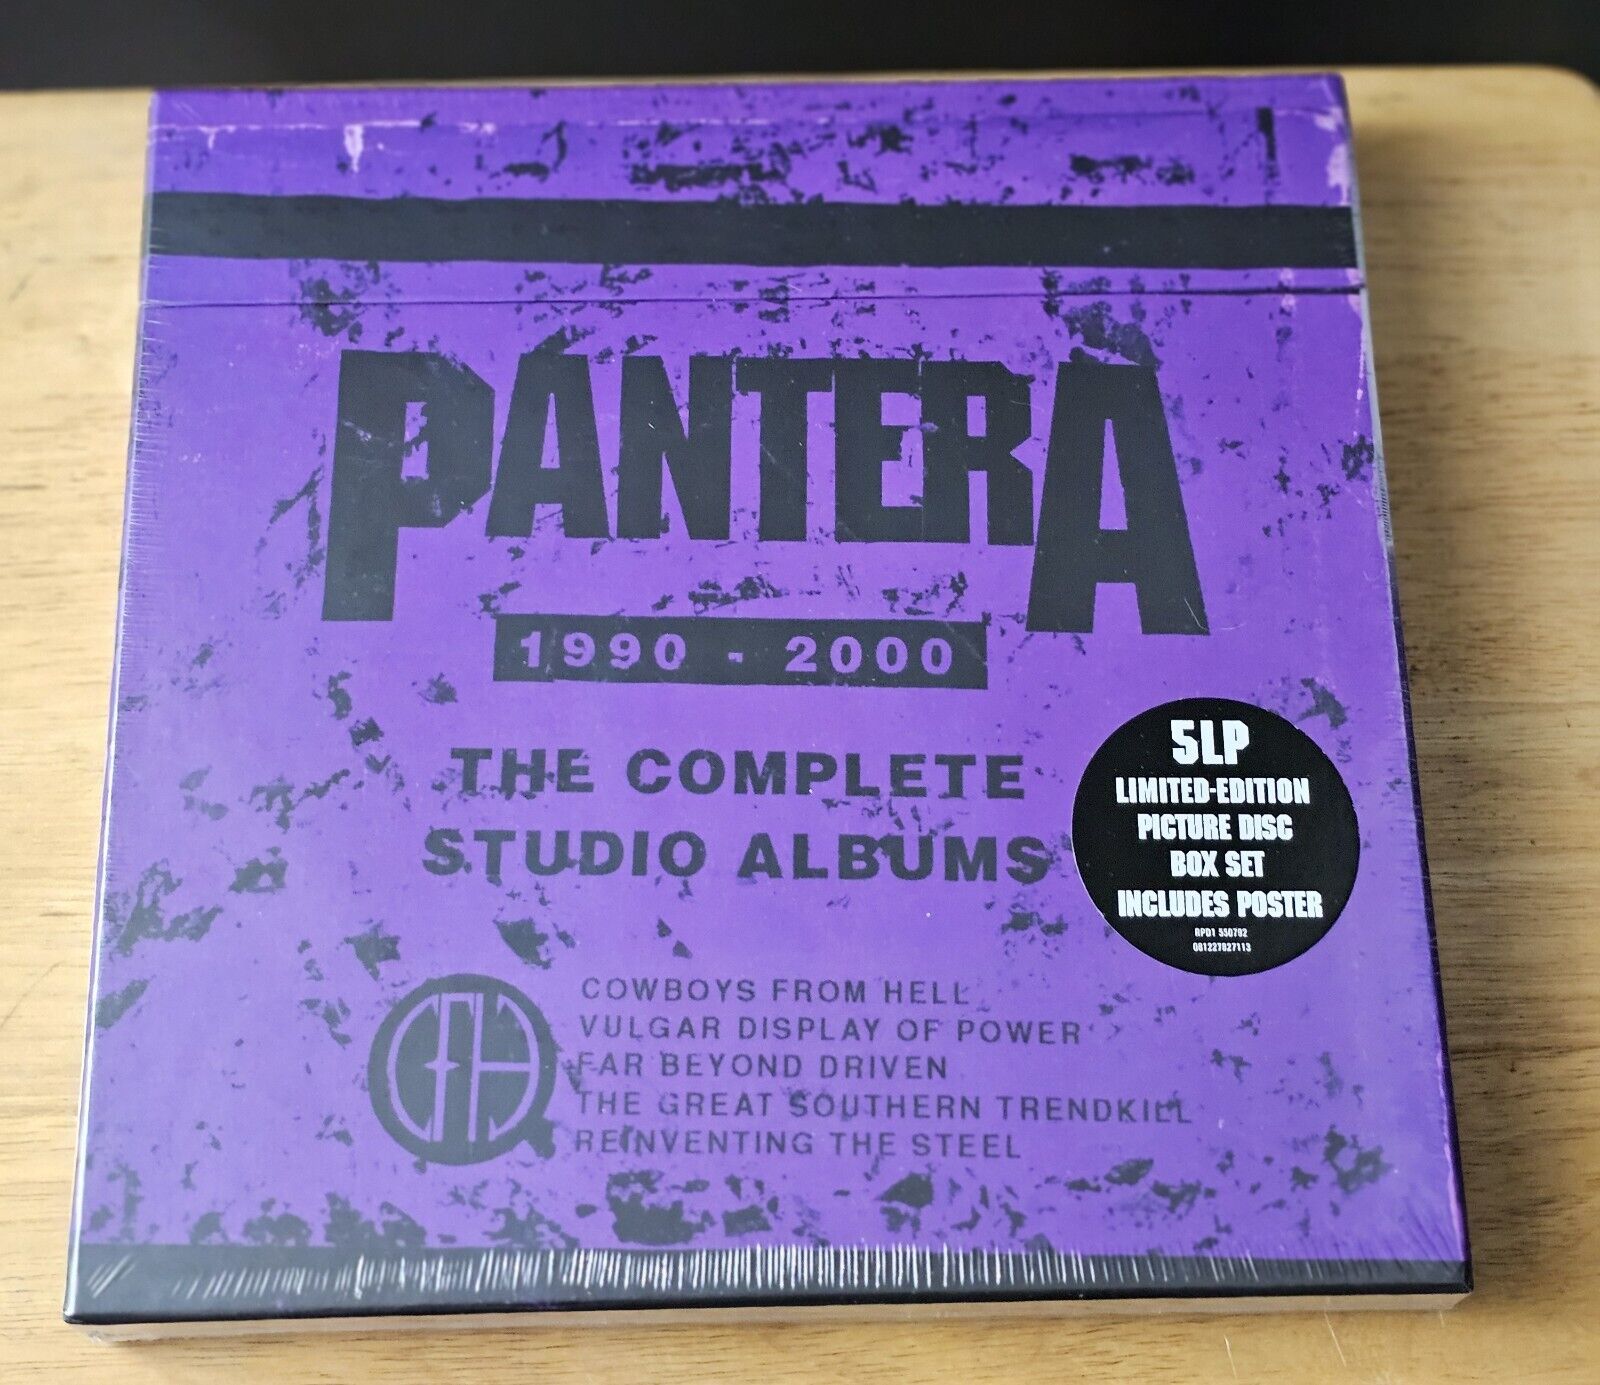 PANTERA - THE COMPLETE STUDIO ALBUMS 1990-2000 (PICTURE DISC BOXED SET) NEW